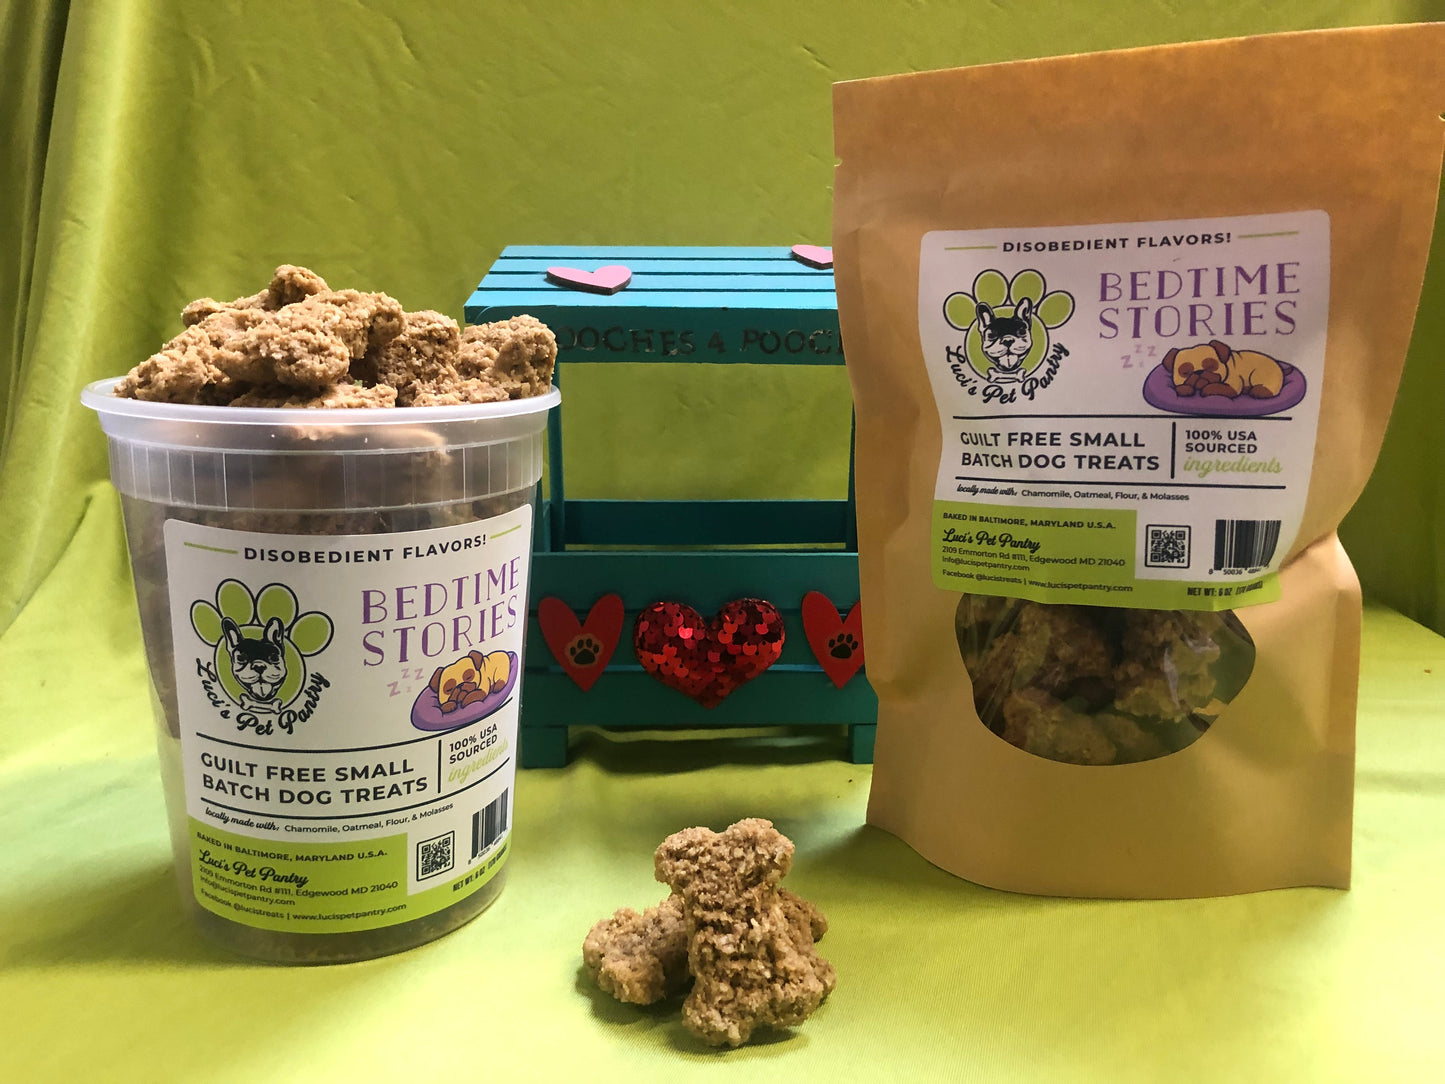 Bedtime Stories - All Natural Calming & Relaxing "Chamomile" Dog & Puppy Treats - Disobedient Biscuits! 6 oz. Pouch